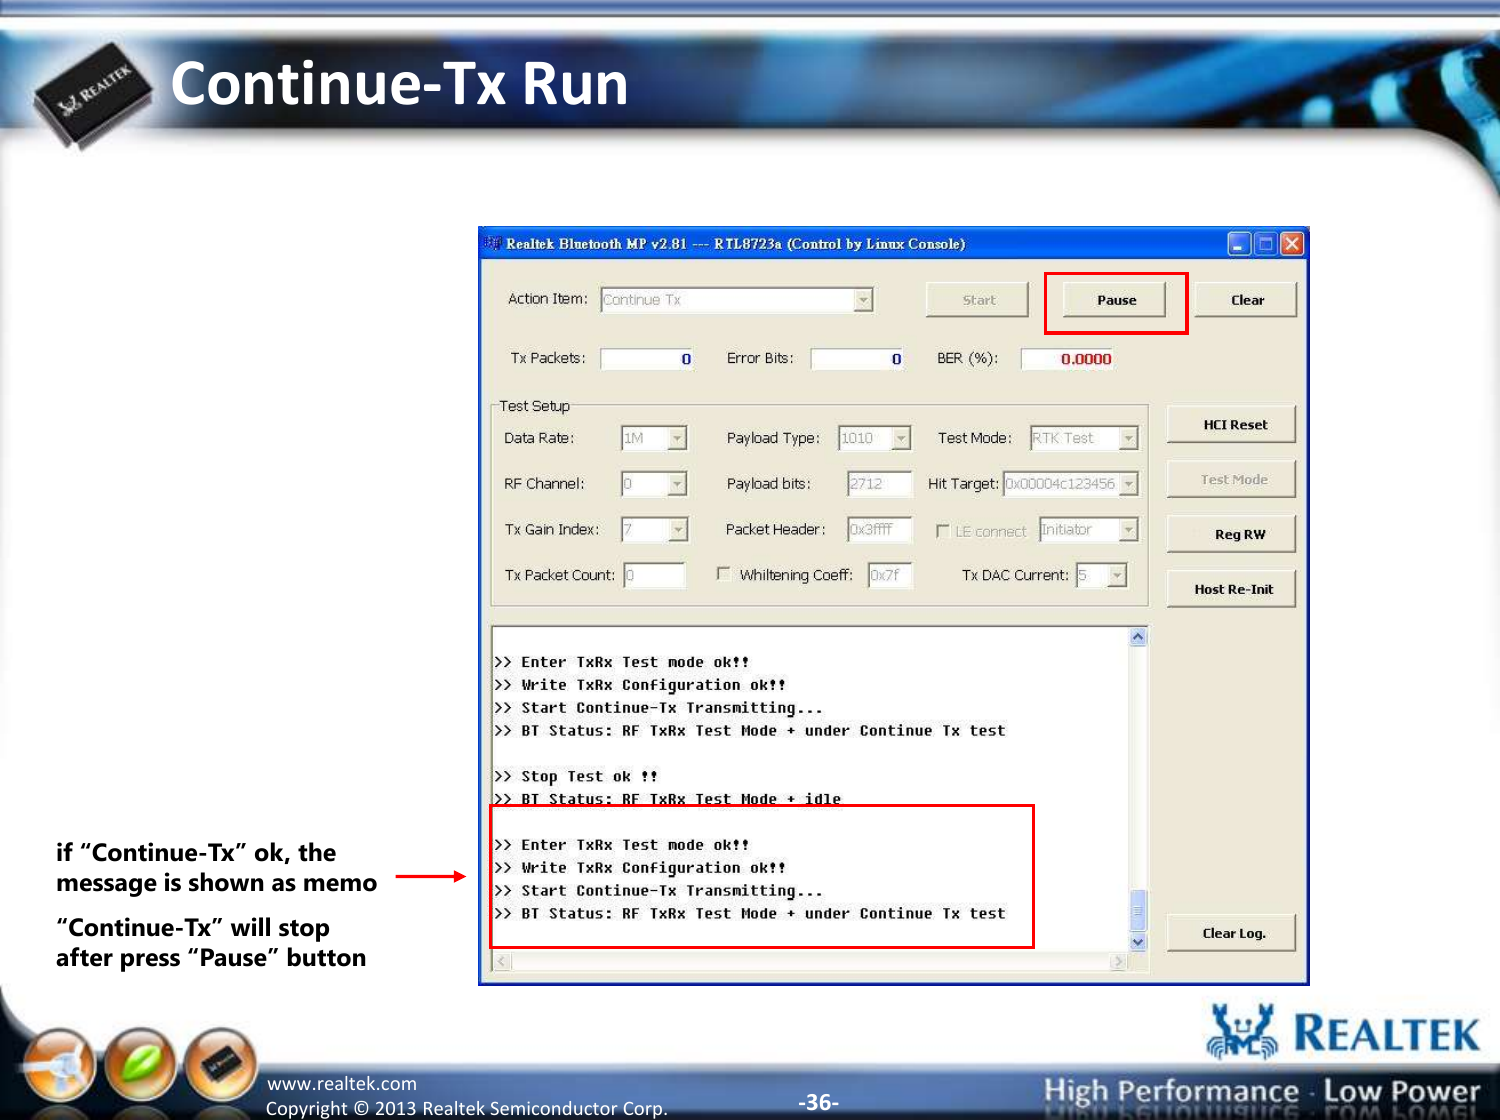 -36- Copyright ©  2013 Realtek Semiconductor Corp. www.realtek.com Continue-Tx Run if “Continue-Tx” ok, the message is shown as memo “Continue-Tx” will stop after press “Pause” button 